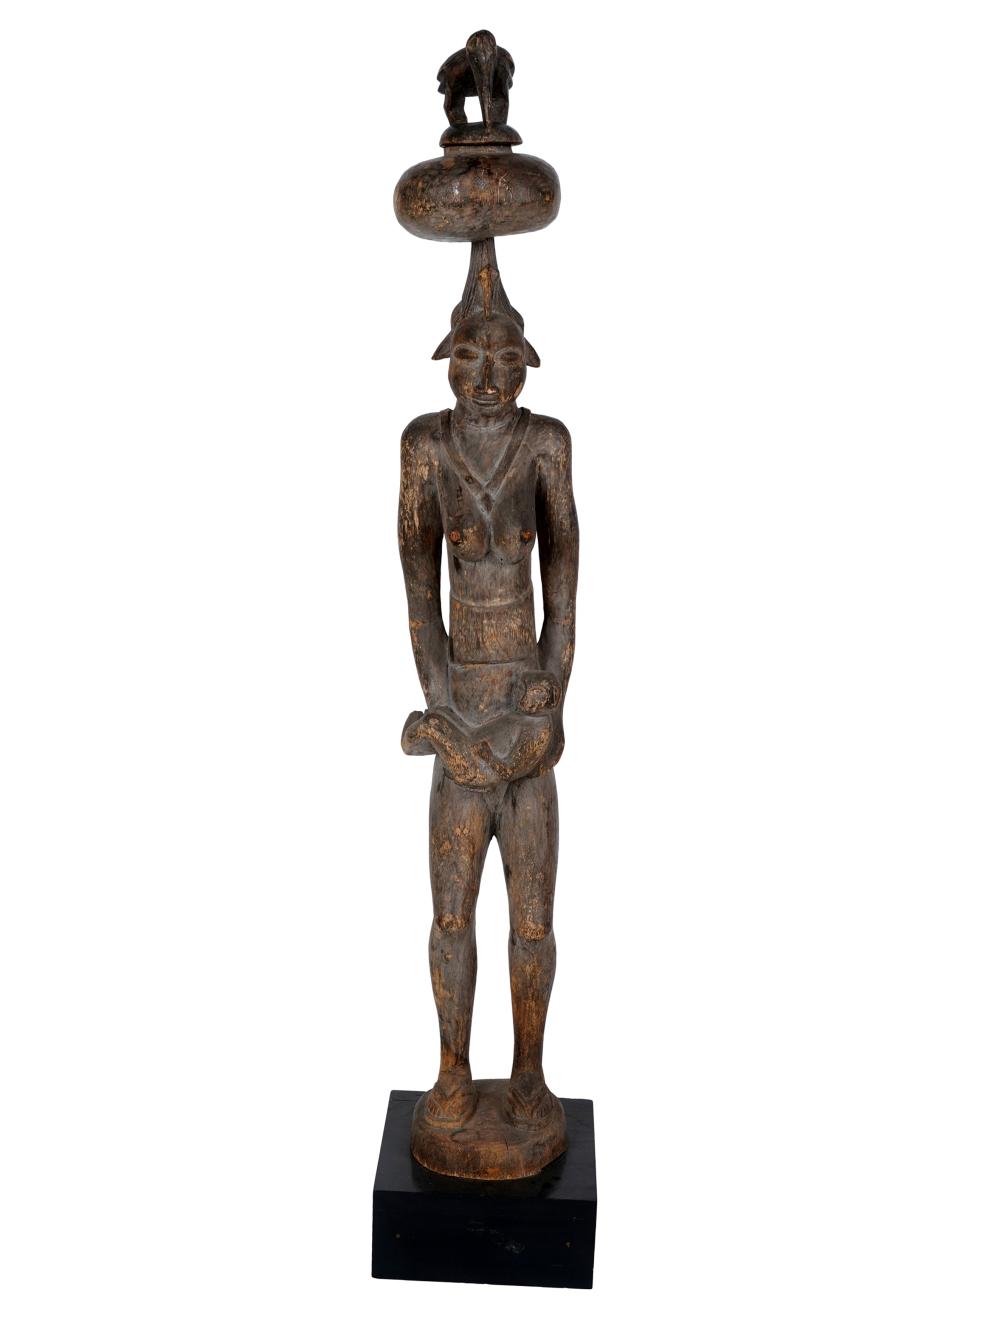 AFRICAN WOOD CARVING ON STANDwith 33433e